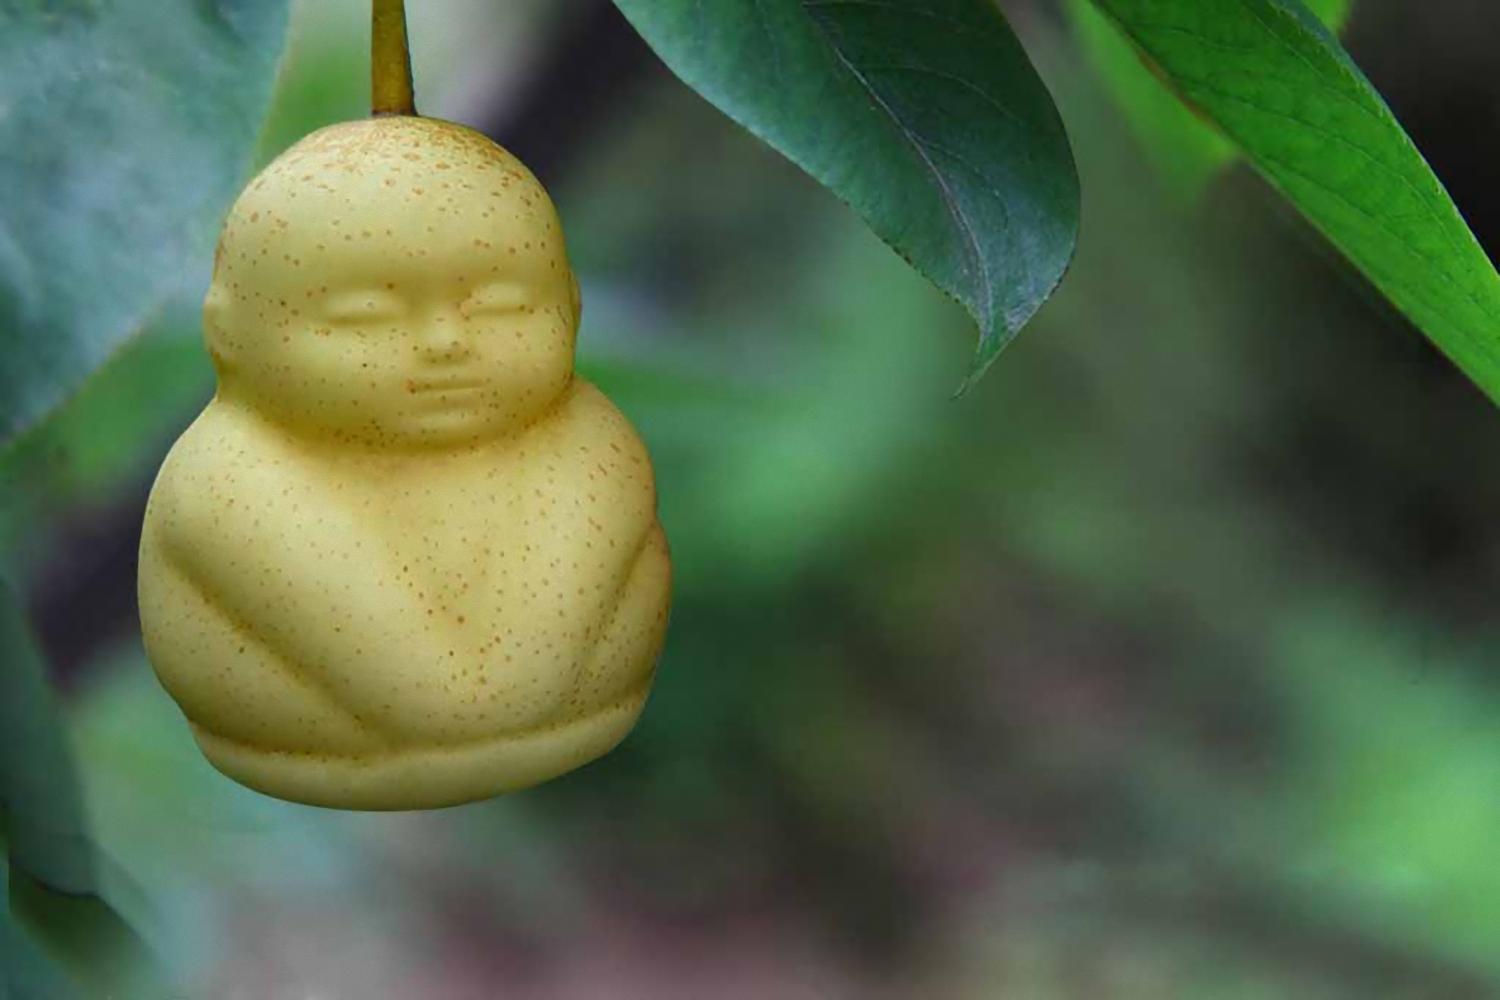 Pay $8 for a Buddha-shaped pear foolish or fun? Your age may predict your answer